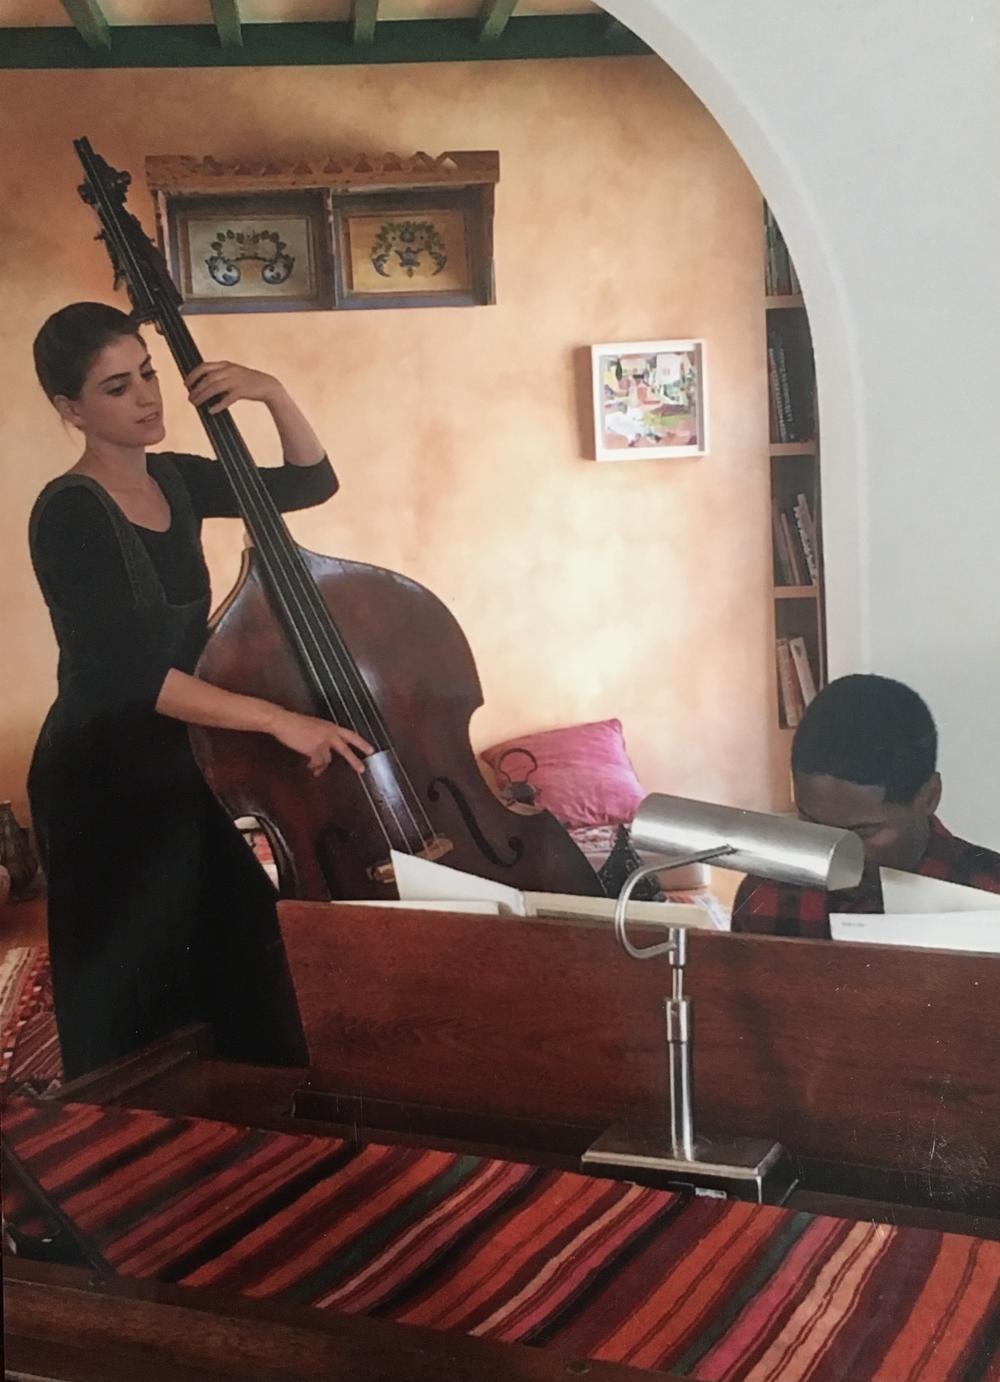 Suleika Jaouad, left, and Jon Batiste, right, first met as teenagers at band camp. In this undated photograph, she plays the double bass while he plays at the piano.